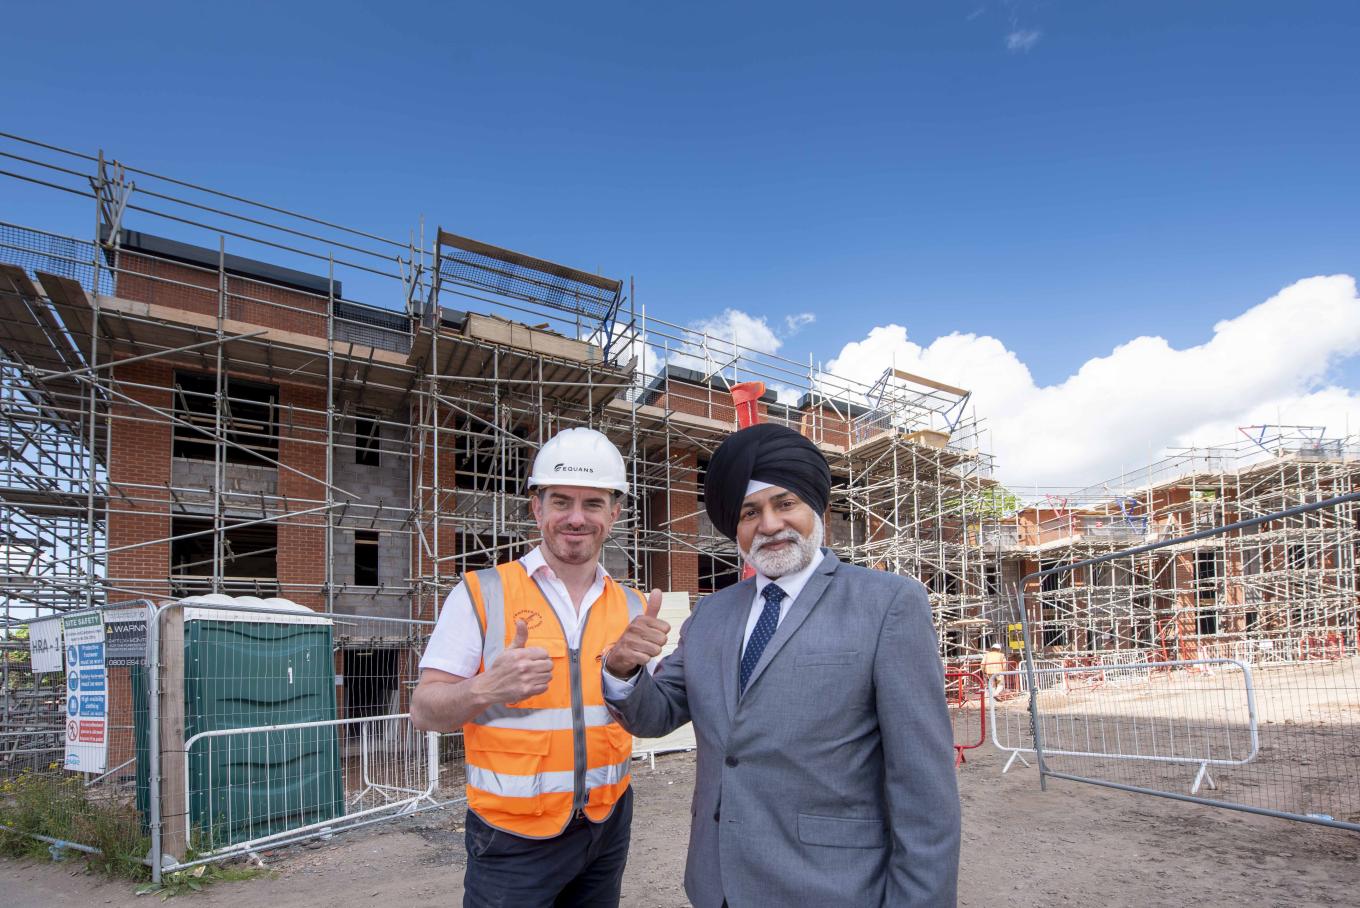 Simon Hoult, EQUANS Project Manager, and Councillor Bhupinder Gakhal, City of Wolverhampton Council Cabinet Member for City Assets and Housing, in front of the new council homes at Heath Town